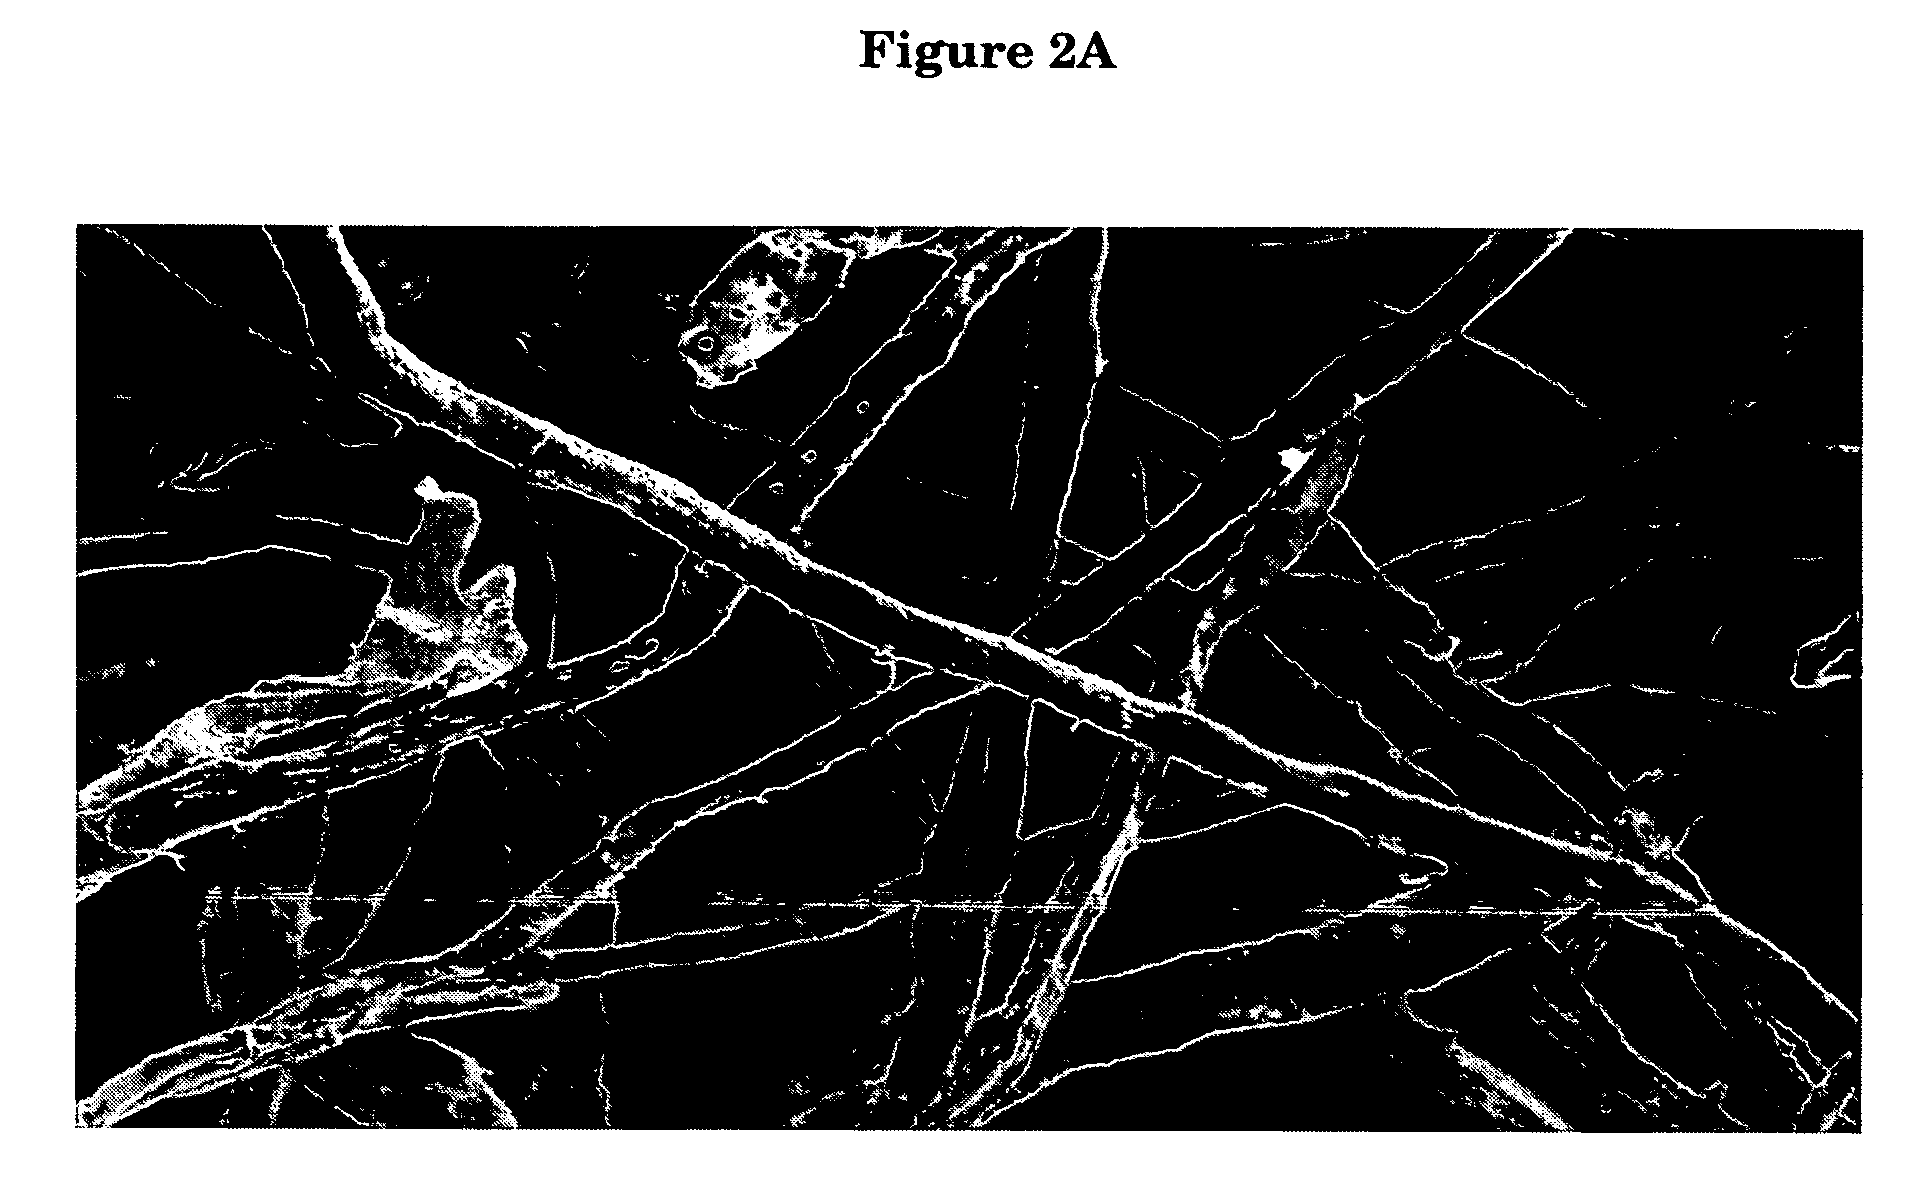 Method for making chemically cross-linked cellulosic fiber in the sheet form